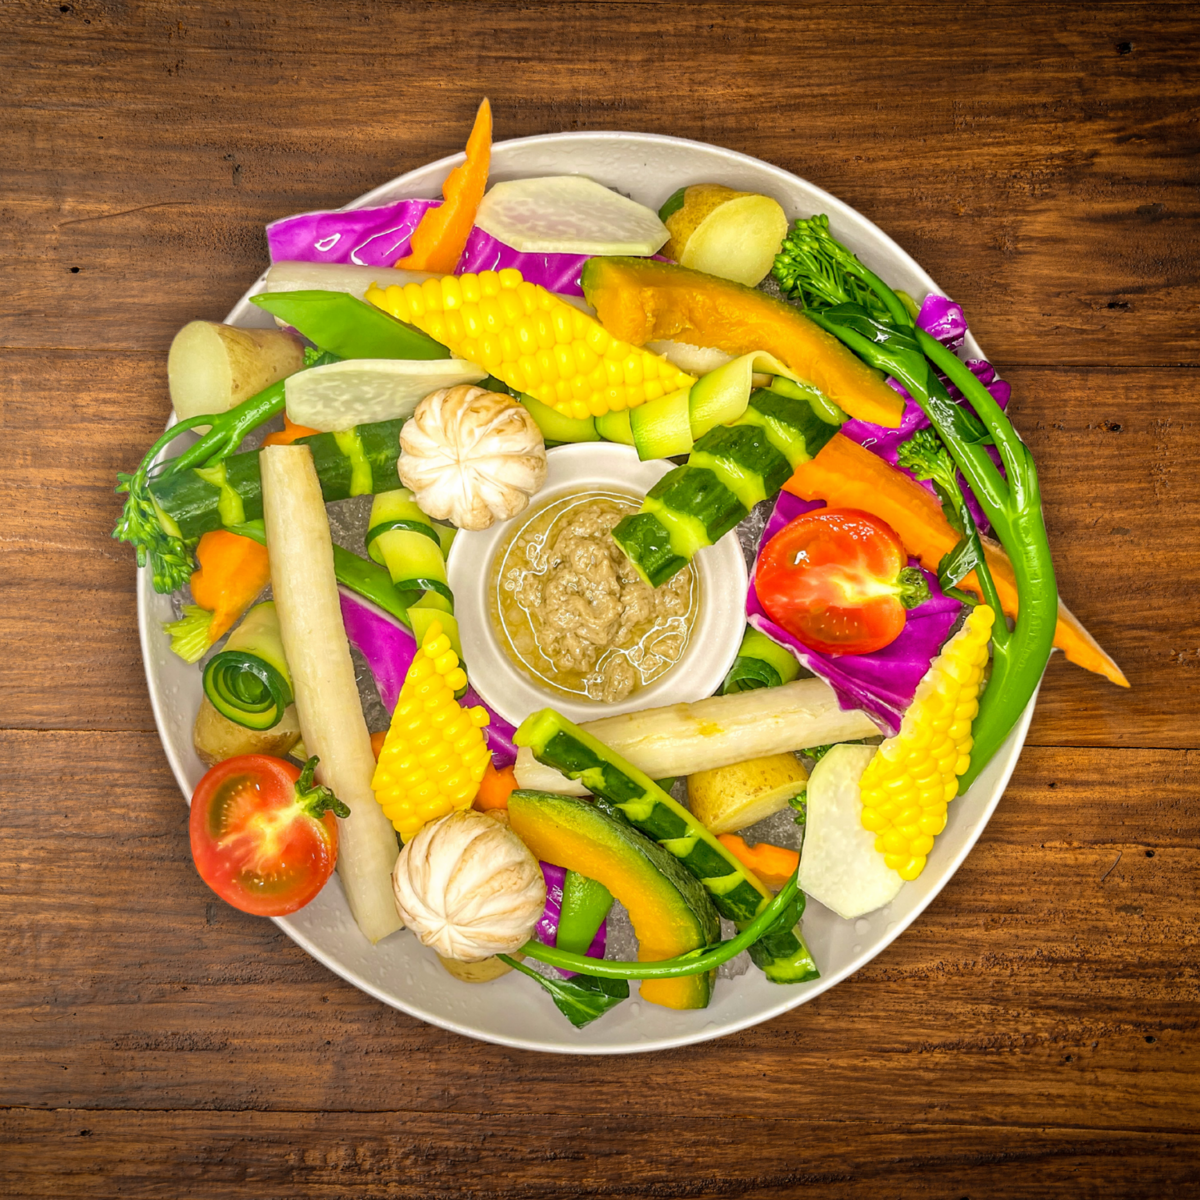 Bagna cauda with colorful vegetables